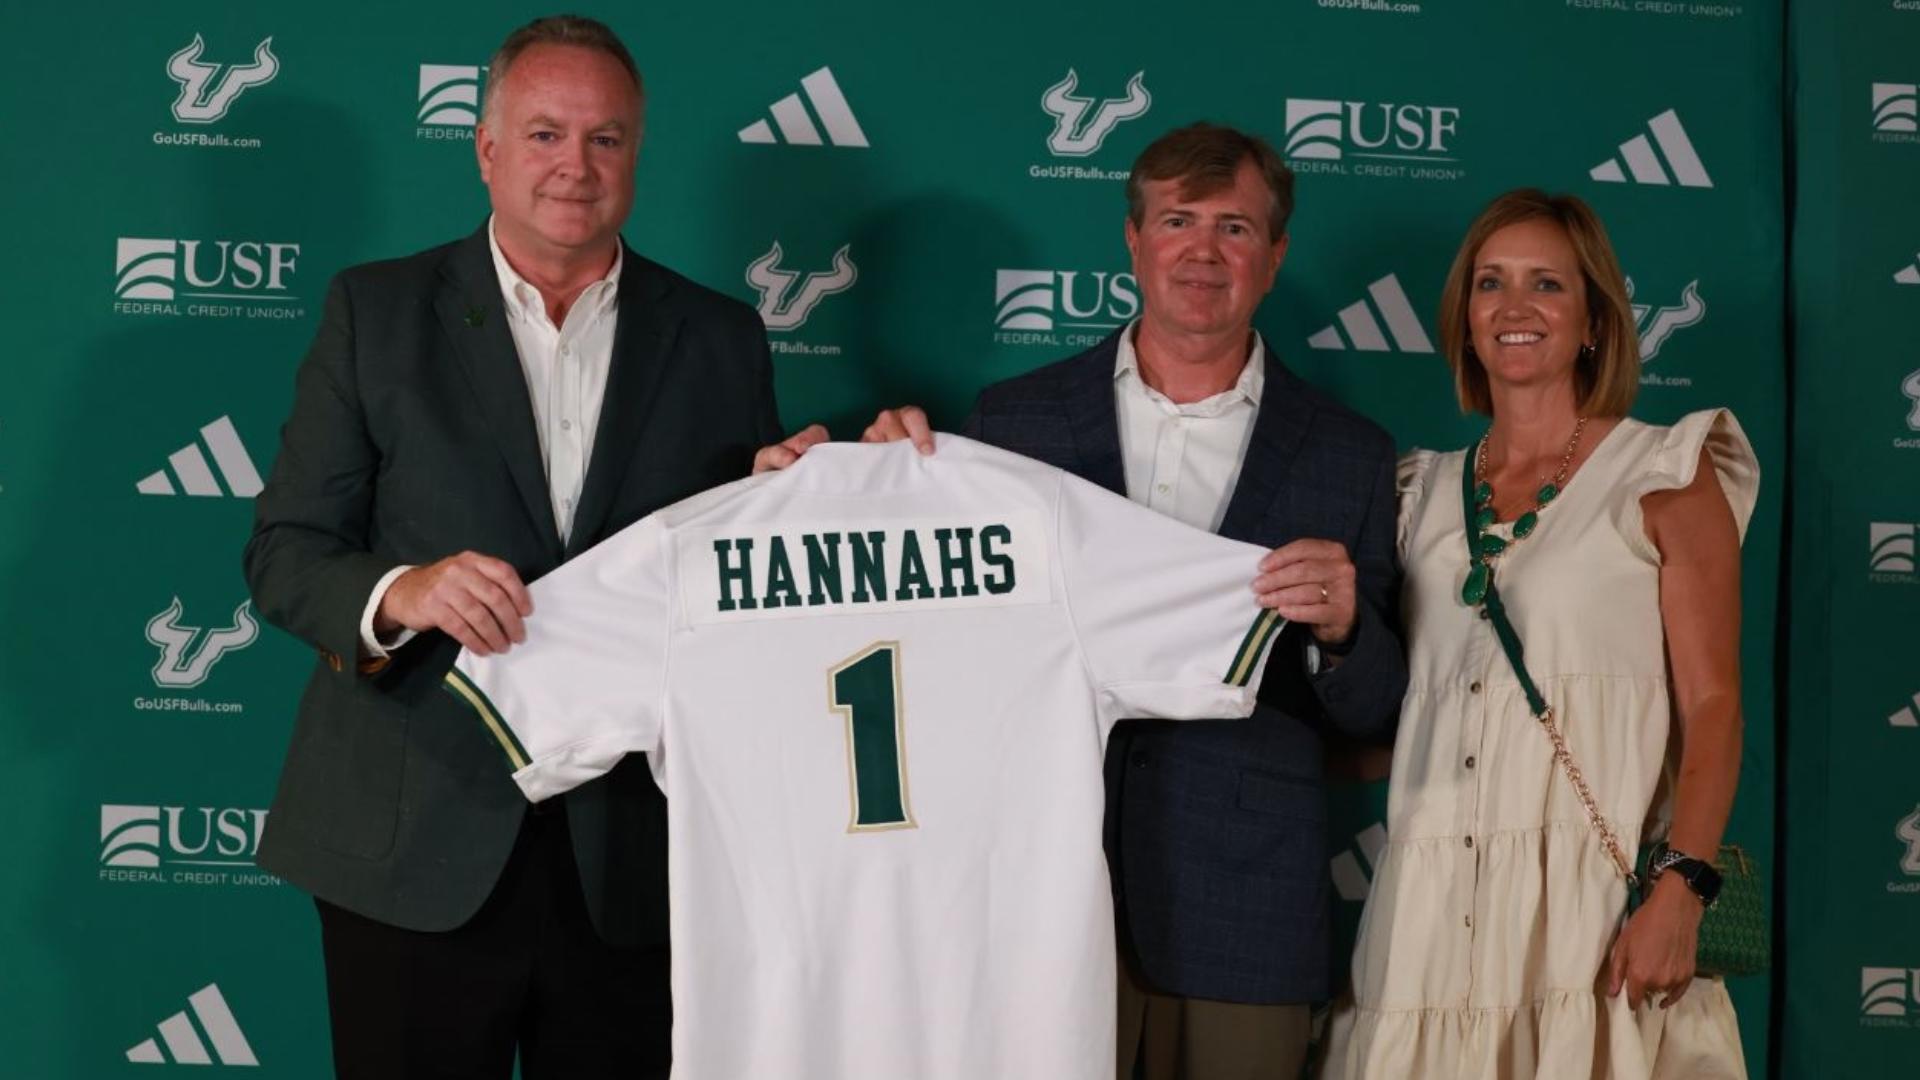 Hannahs spent the last 11 seasons as the head baseball coach at his alma mater Indiana State.